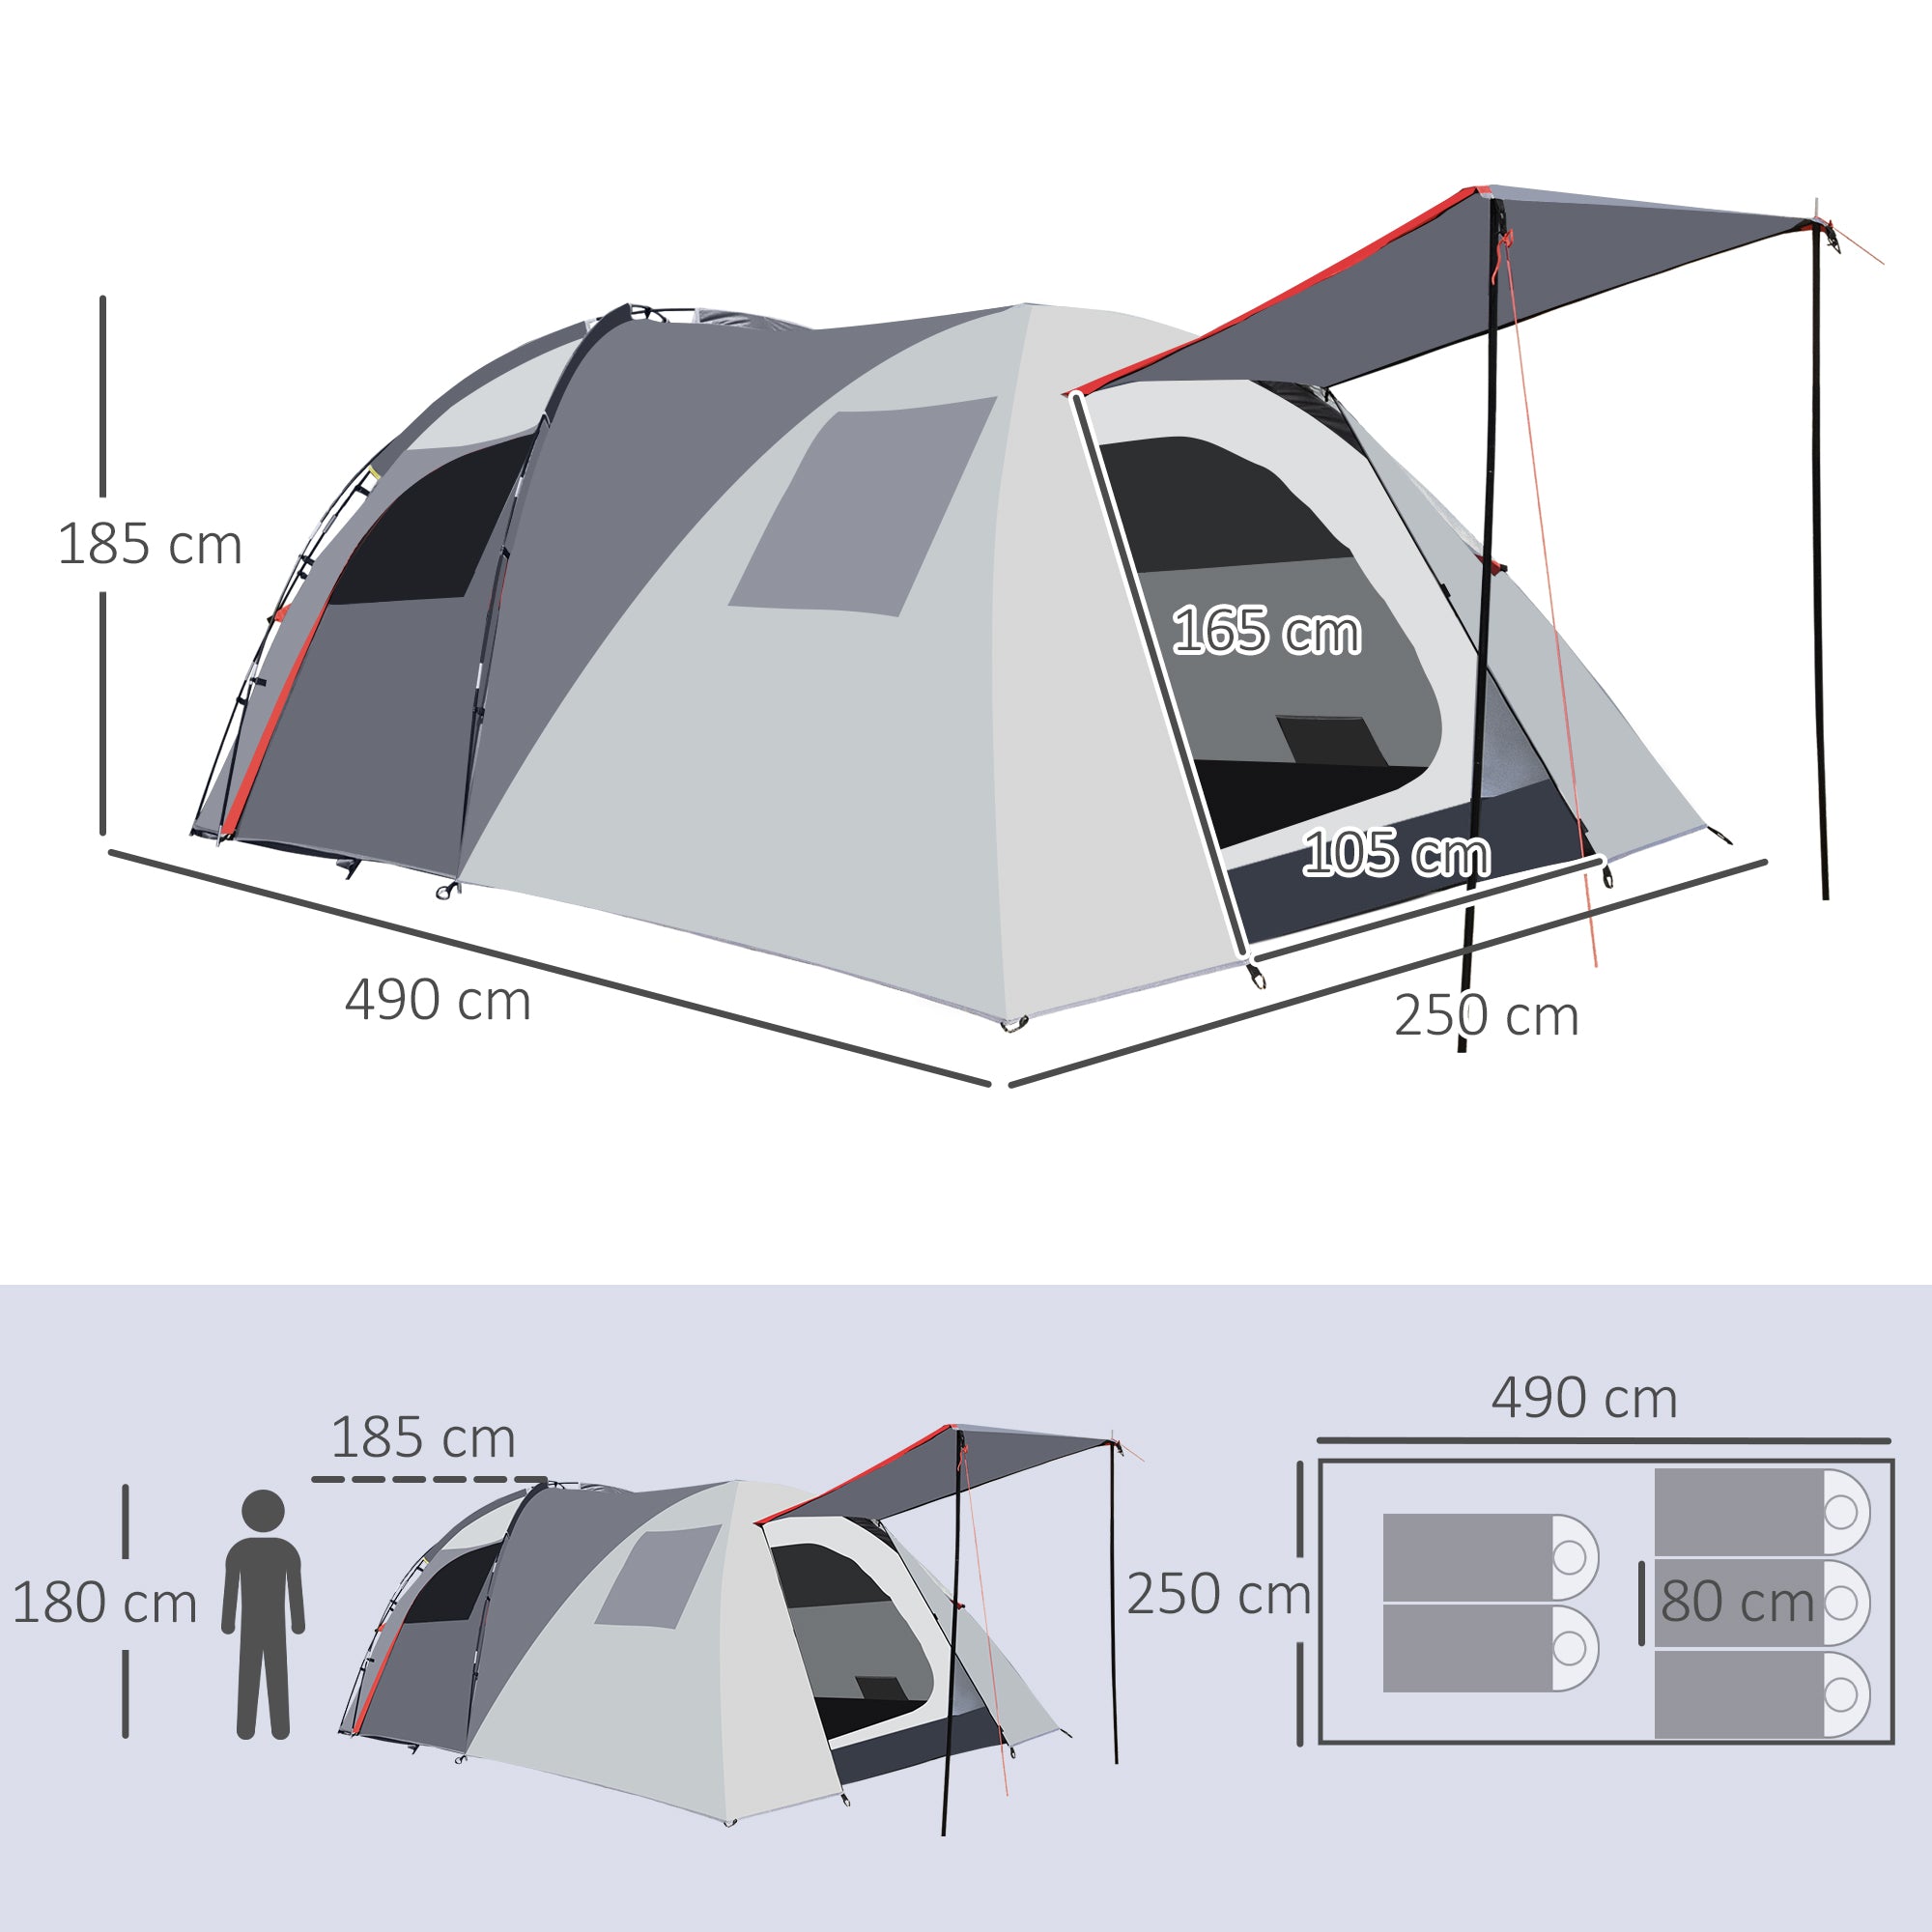 Outsunny 4-5 Man Outdoor Tunnel Tent, Two Room Camping Tent with Portable Mat, Sewn-In Floor Breathable Mesh Windows for Fishing, Festival, Hiking